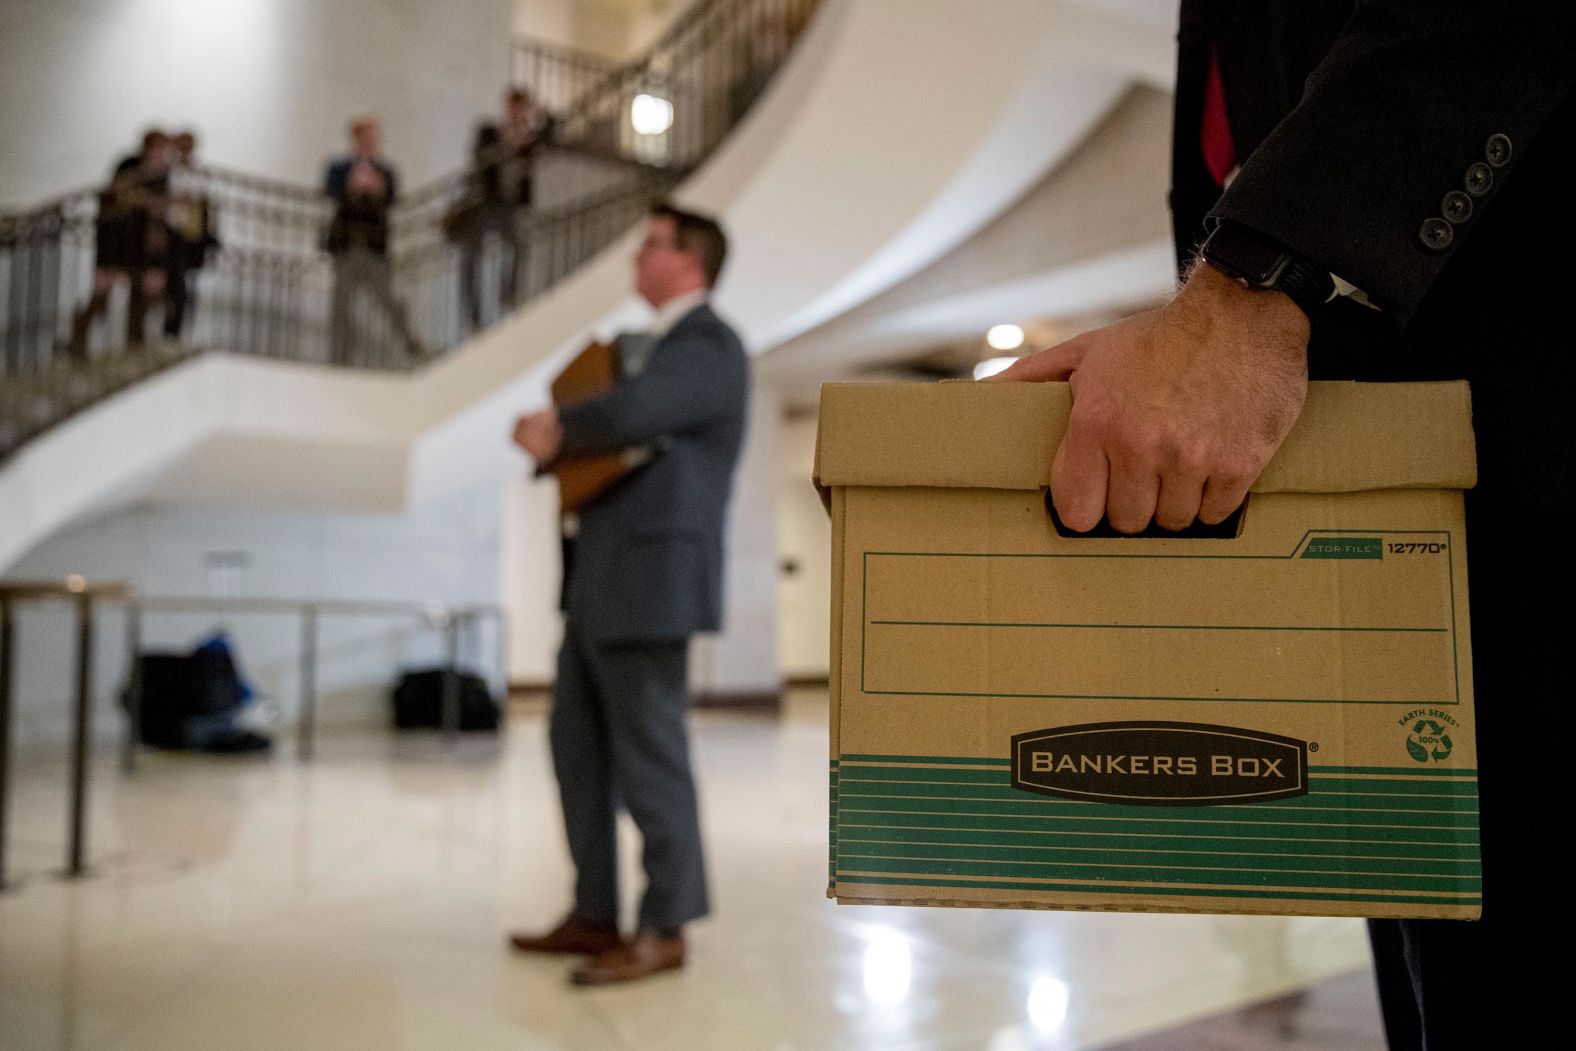 Staff members hold files as US Reps. Jim Jordan and Lee Zeldin, both Republicans, speak to reporters on October 14. It was just after Fiona Hill, Trump's former top Russia adviser, <a href="https://www.cnn.com/2019/10/14/politics/who-is-fiona-hill/index.html" target="_blank">testified before congressional lawmakers.</a>